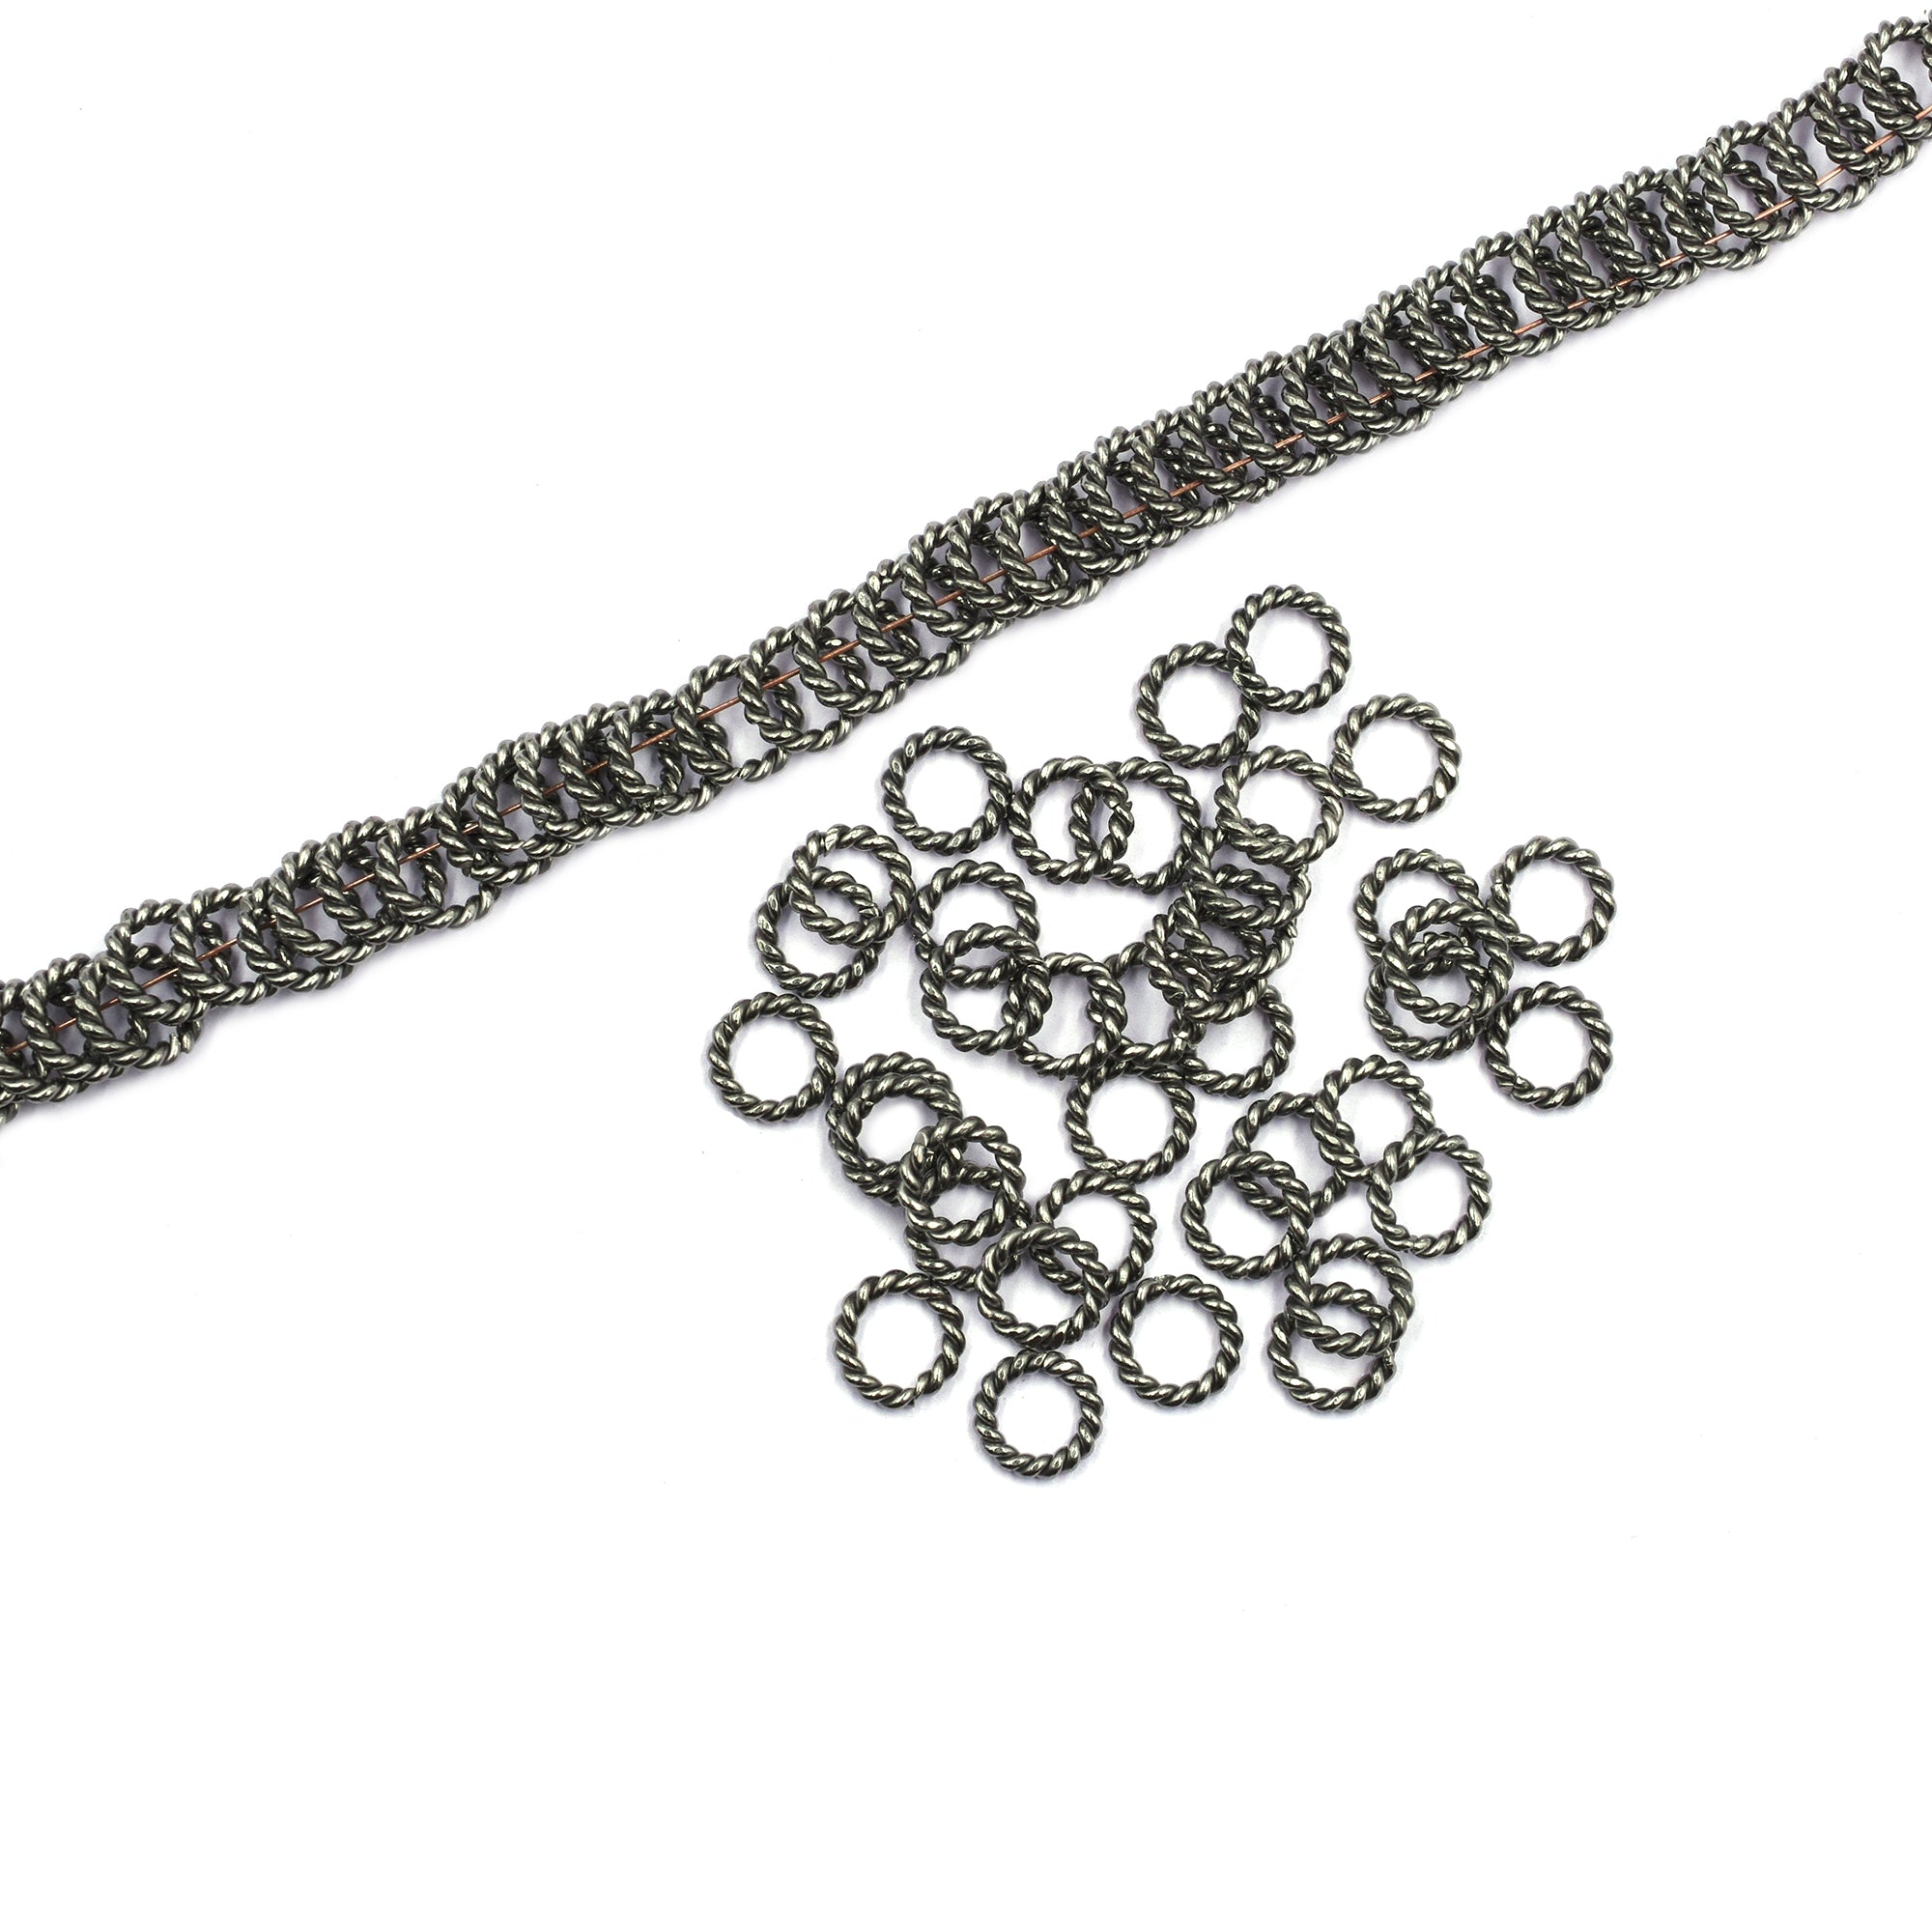 45 Pcs 10mm Twisted Wire Jump Ring Black Finished Copper